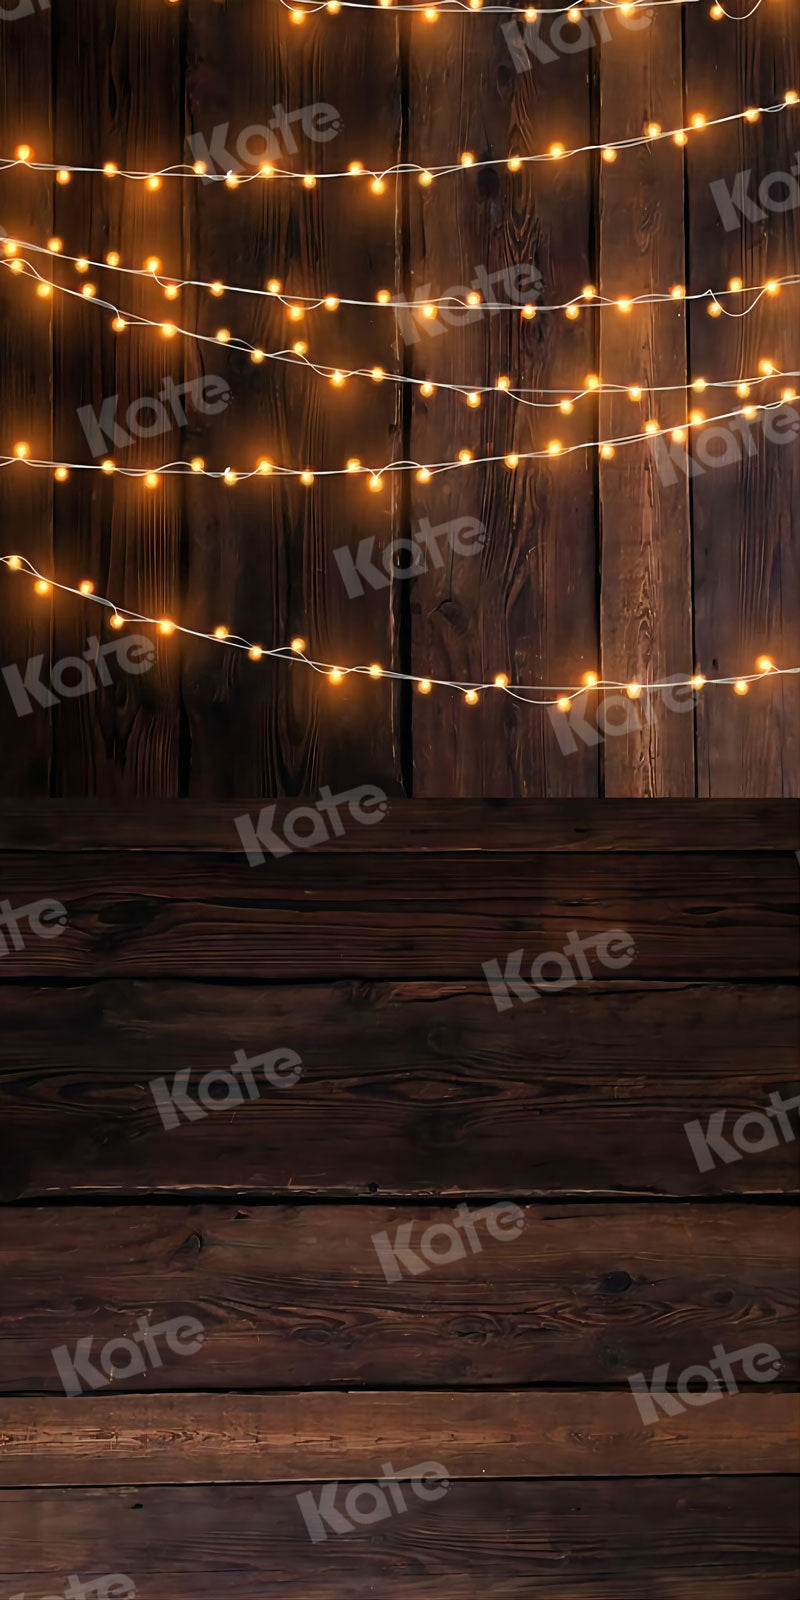 Kate Sweep Vintage Light Wood Backdrop for Photography